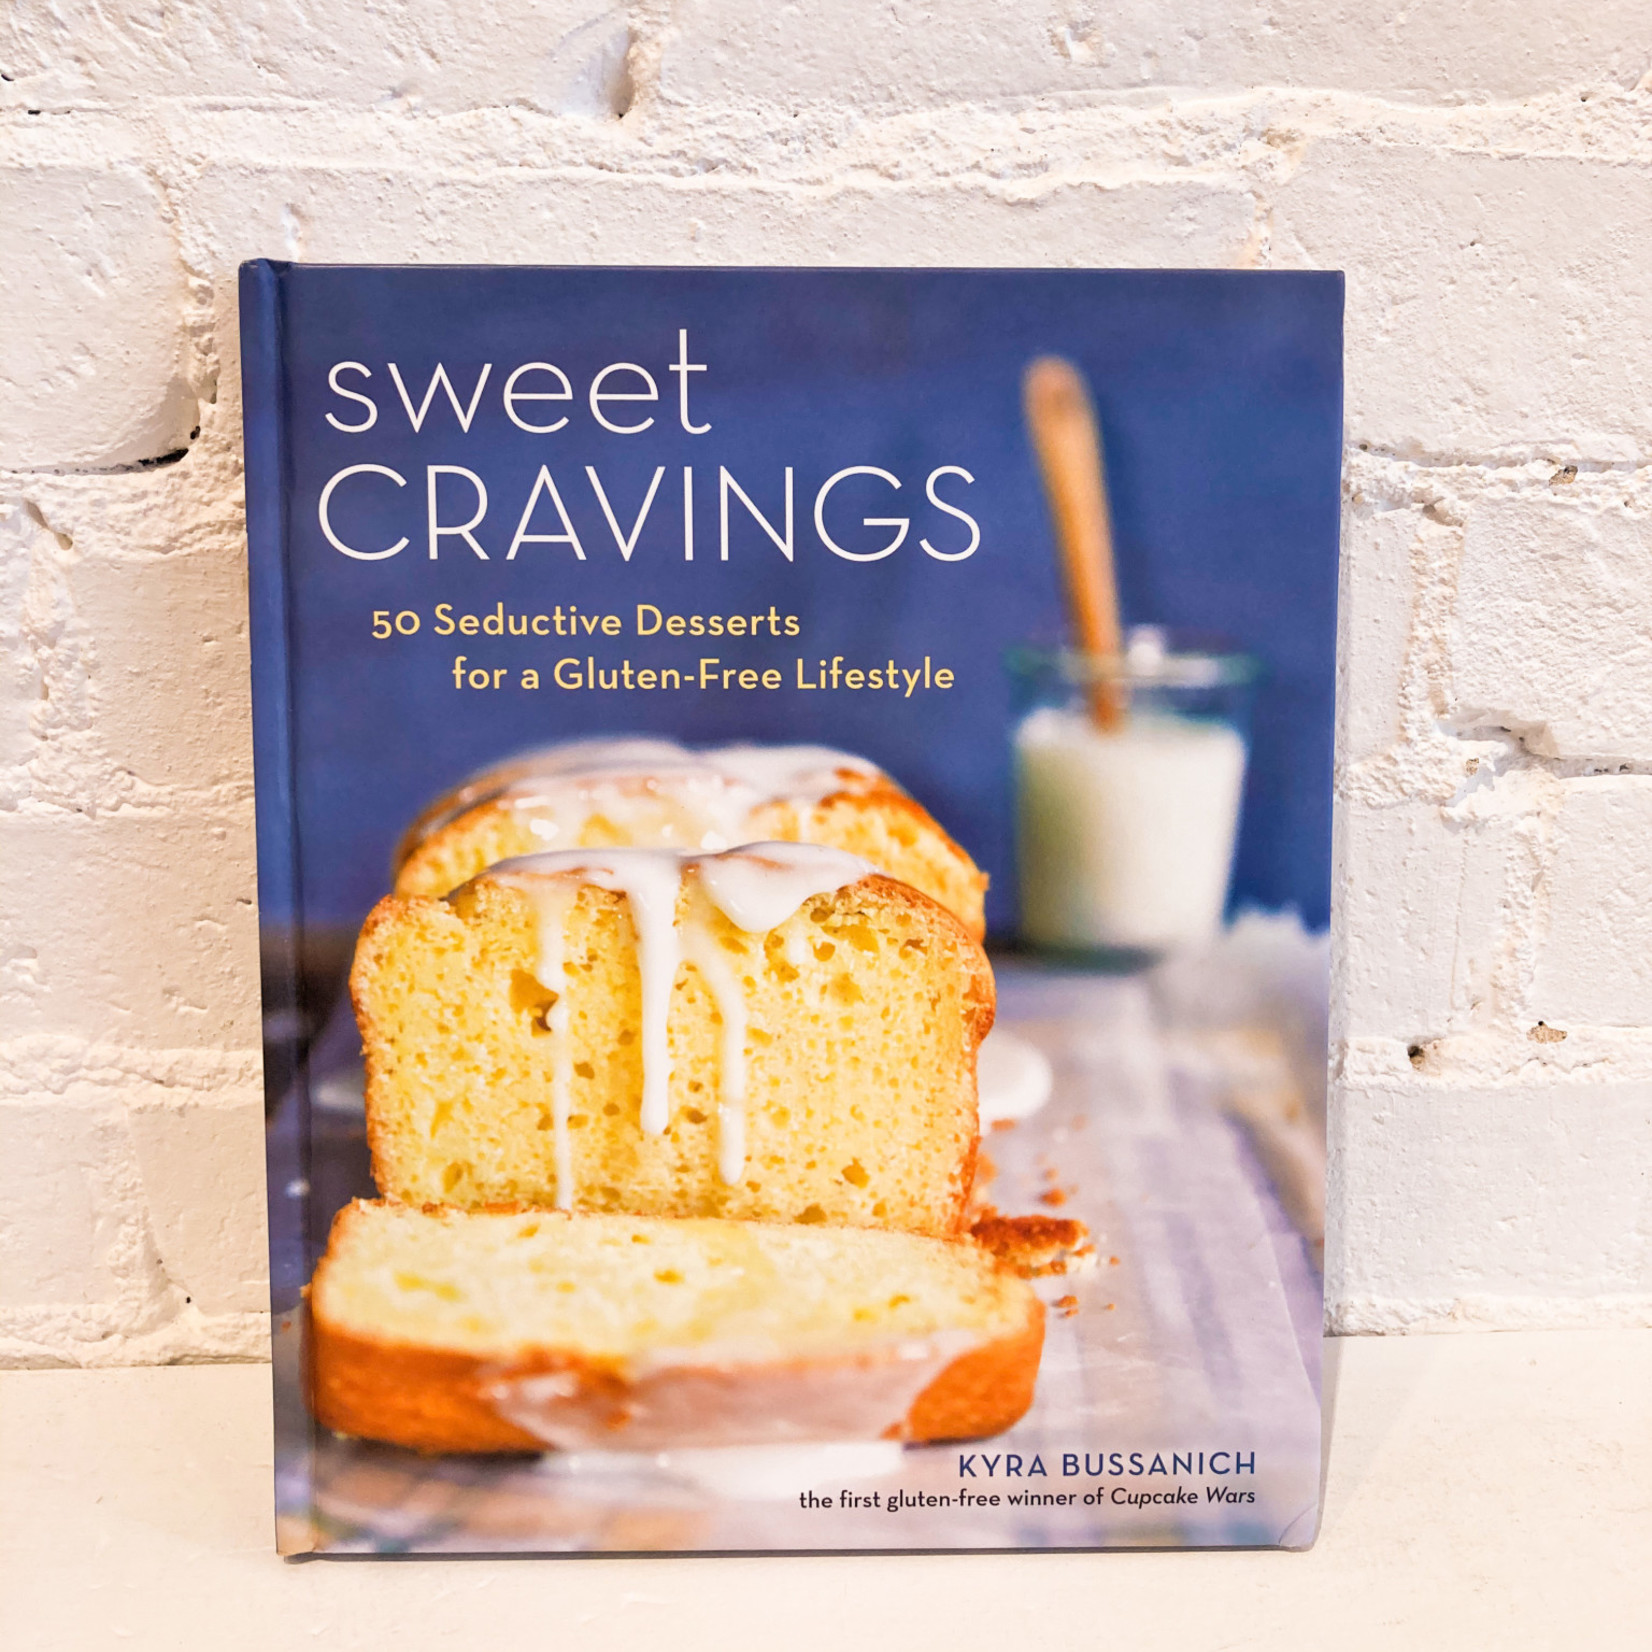 Sweet Cravings by Kyra Bussanich